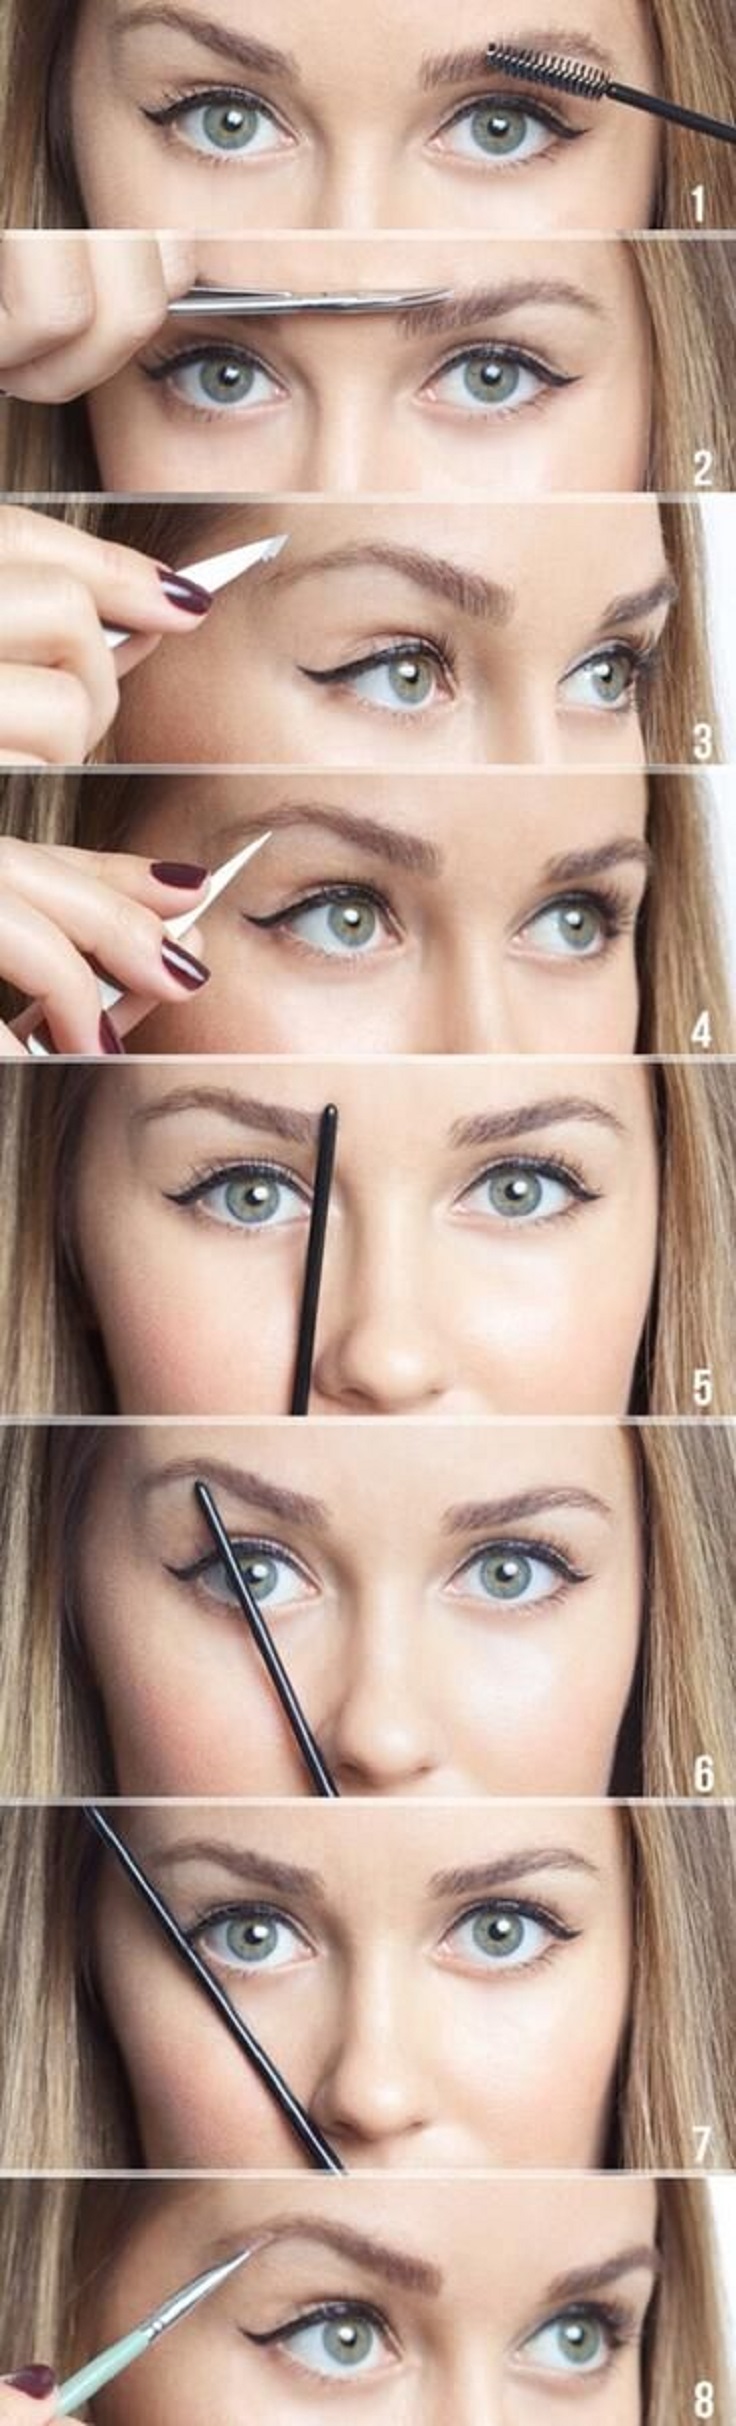 Pluck-Your-Eyebrows-in-the-Right-Way